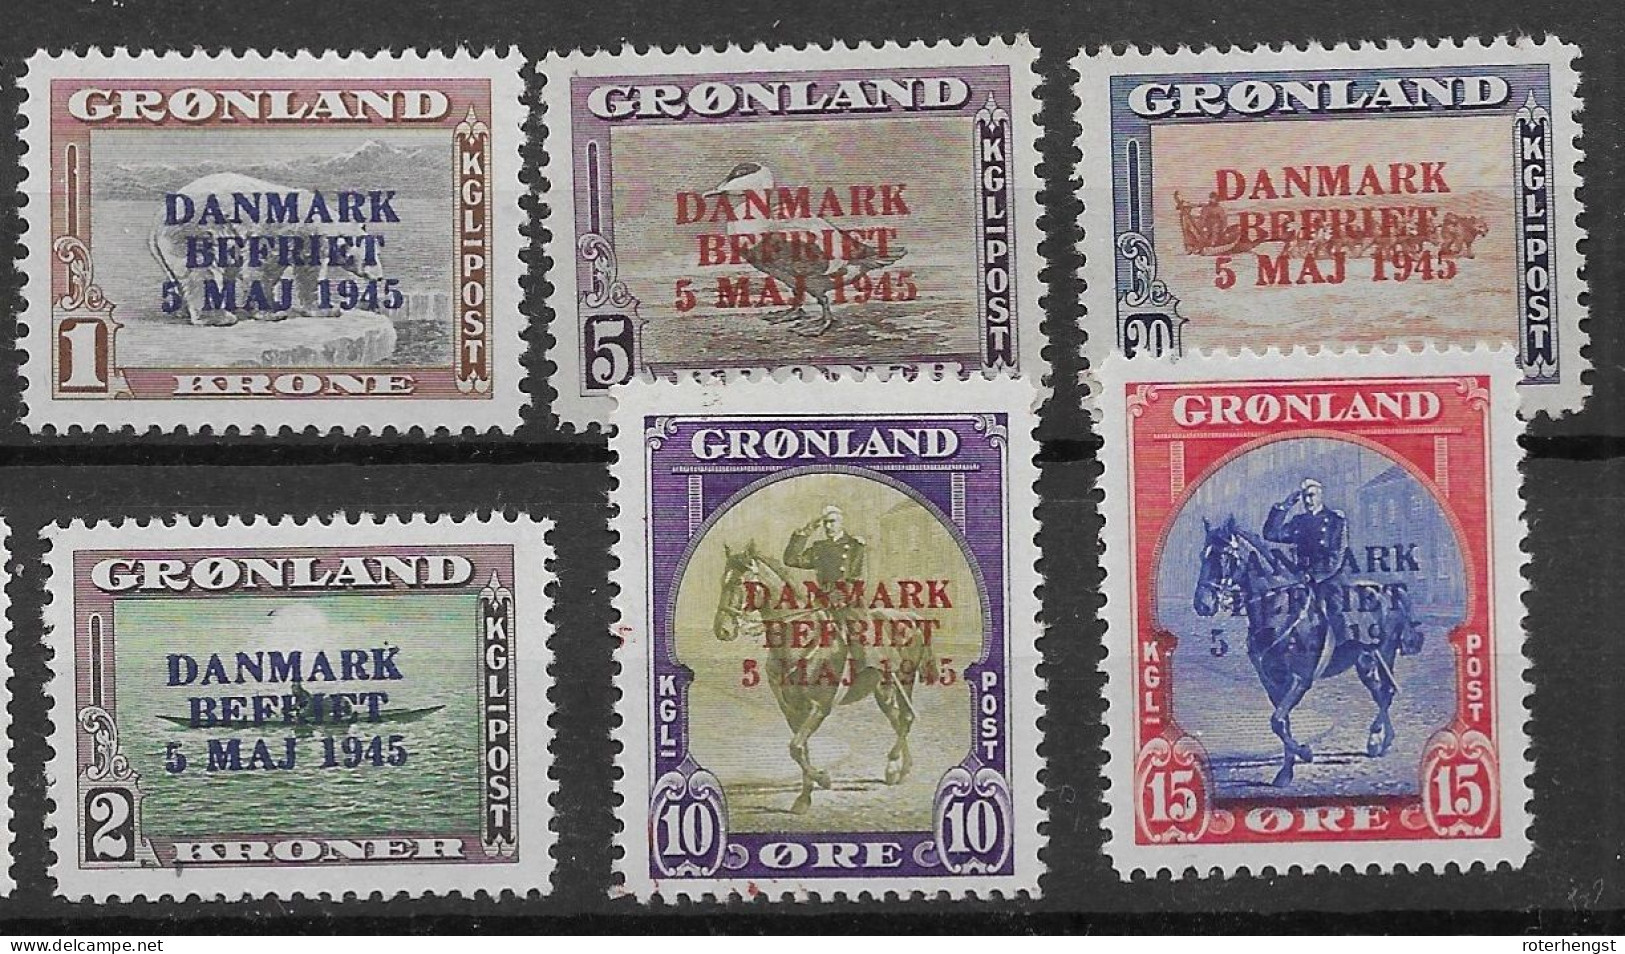 Greenland RARE Complete Set With Error Colour Overprints 1945 (1800 Euros) Mlh * Mint Extremely Low Hinge Trace - Neufs